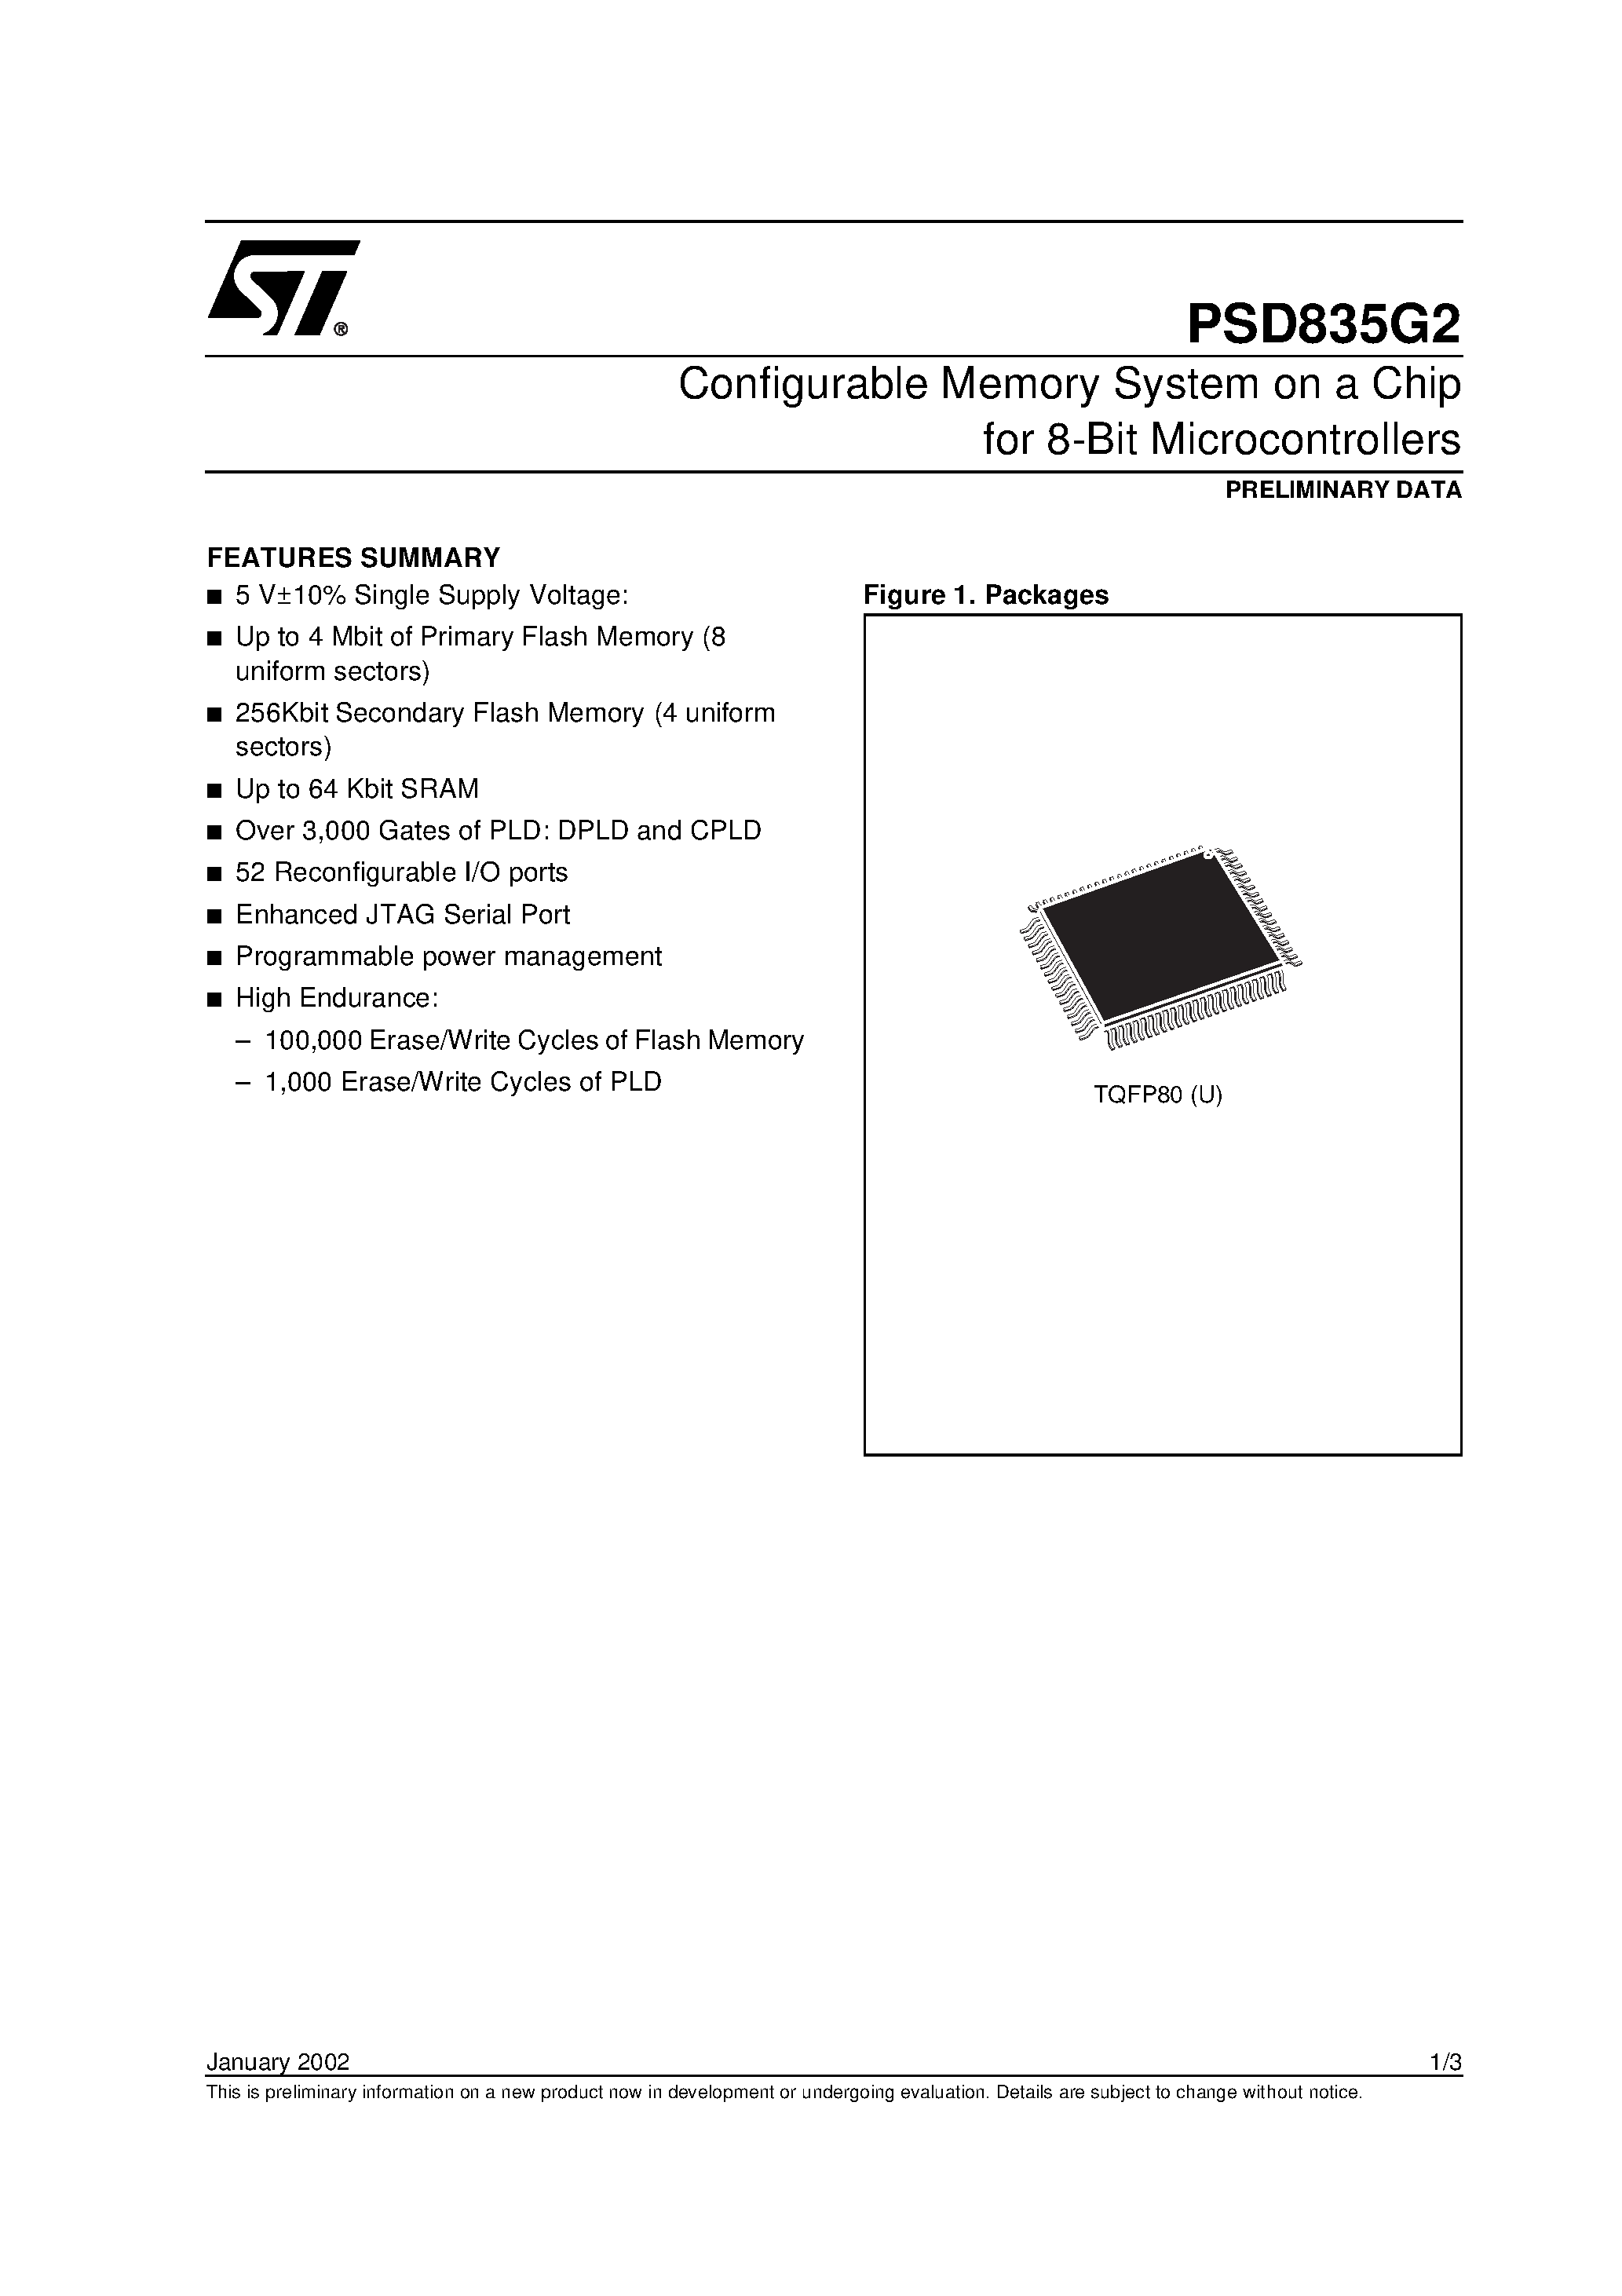 Datasheet PSD835F1-A-90MI - Configurable Memory System on a Chip for 8-Bit Microcontrollers page 1